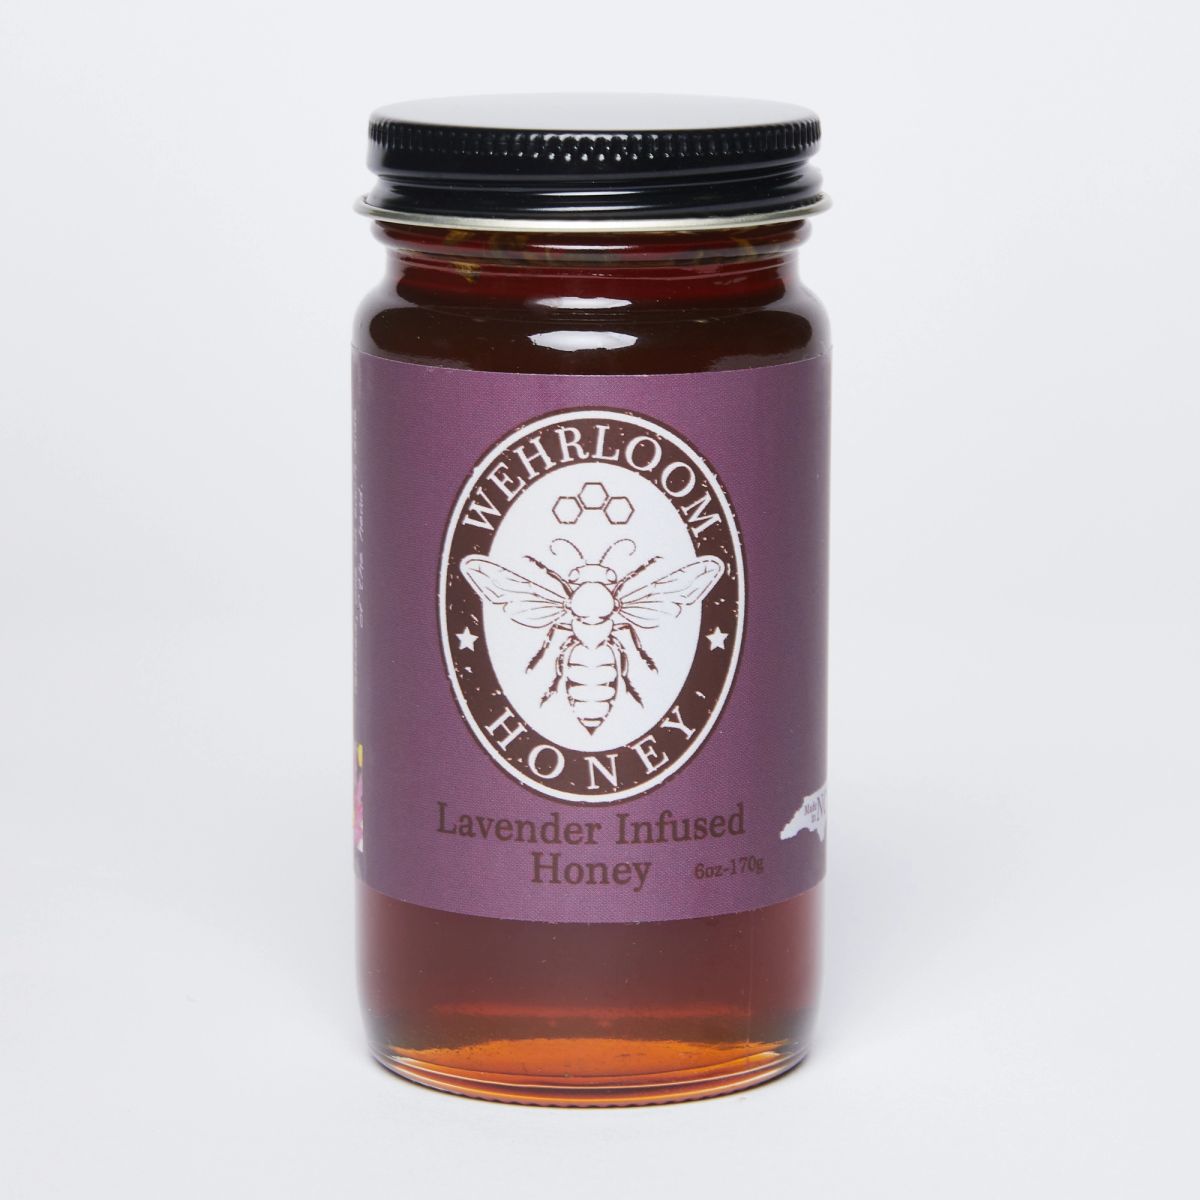 Glass jar filled with golden honey with a black lid and purple label that reads 'Lavender infused honey''.